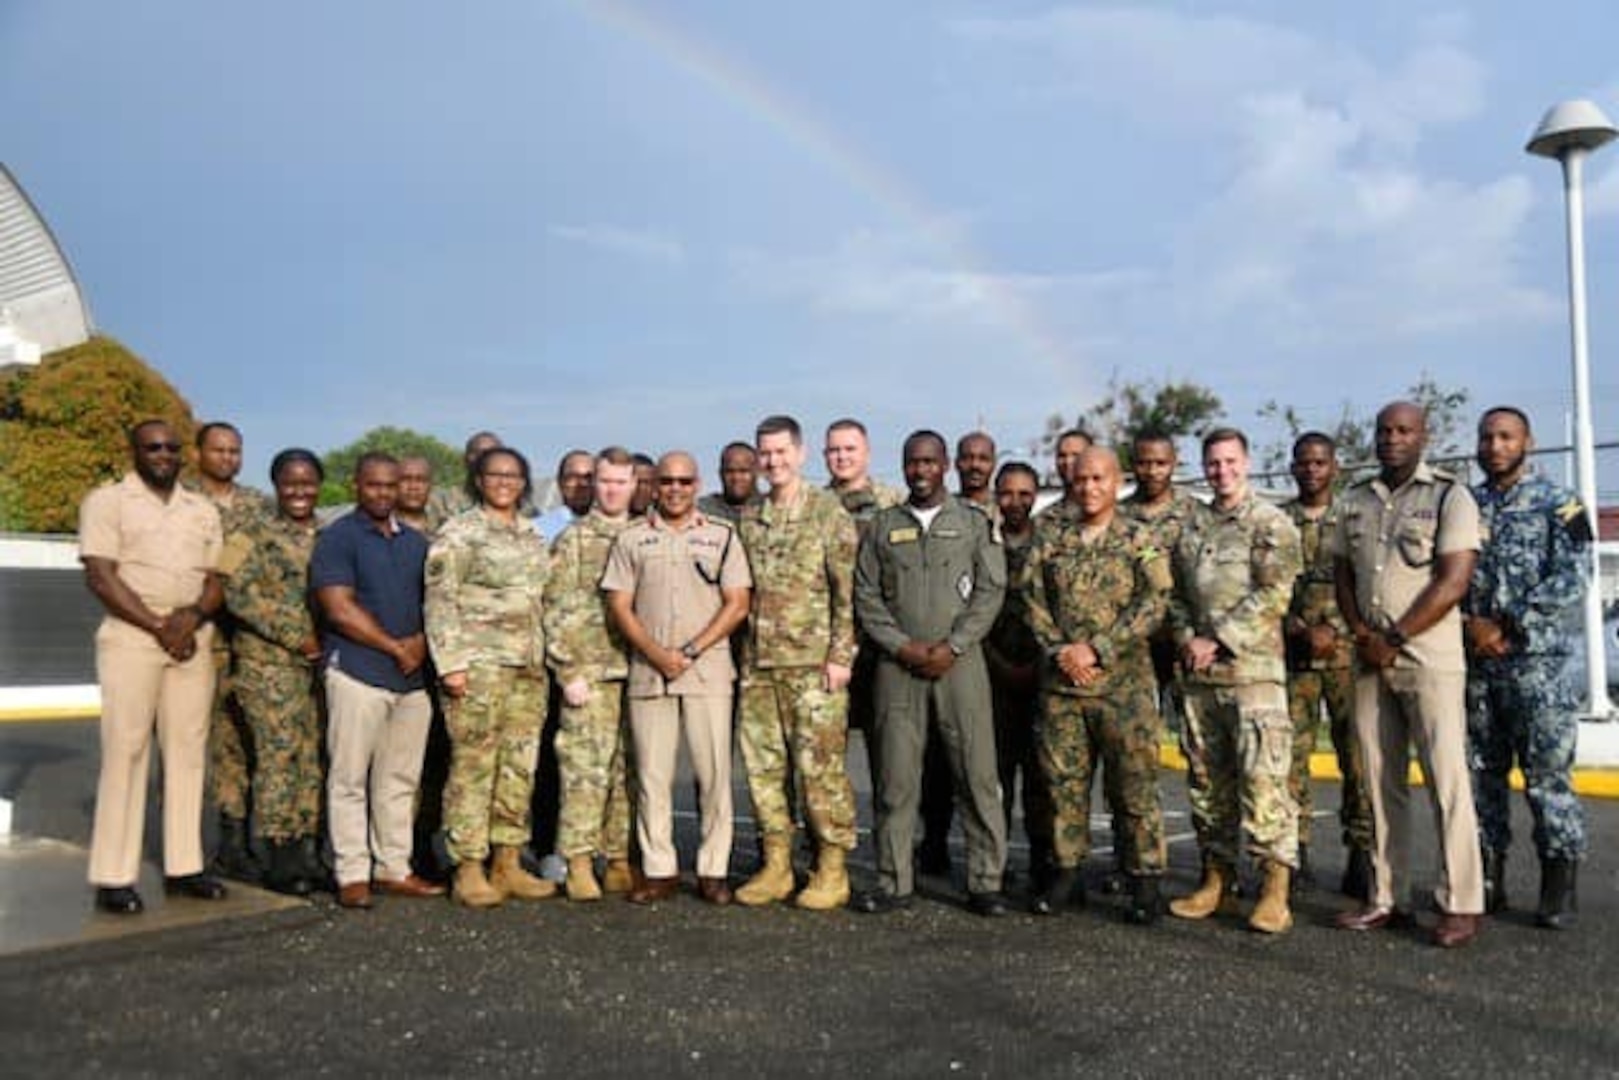 U.S. Army and Air Force subject matter experts with the District of Columbia National Guard joined their Jamaican Defense Force (JDF) counterparts June 27-28 in Kingston, Jamaica to hold the annual JDF-DCNG planning meeting for the Defense Department’s State Partnership Program (SPP), administered by the National Guard Bureau. The two organizations have been conducting military engagements, including subject matter expert exchanges, key leader engagements and familiarization visits since the partnership began in 1999.